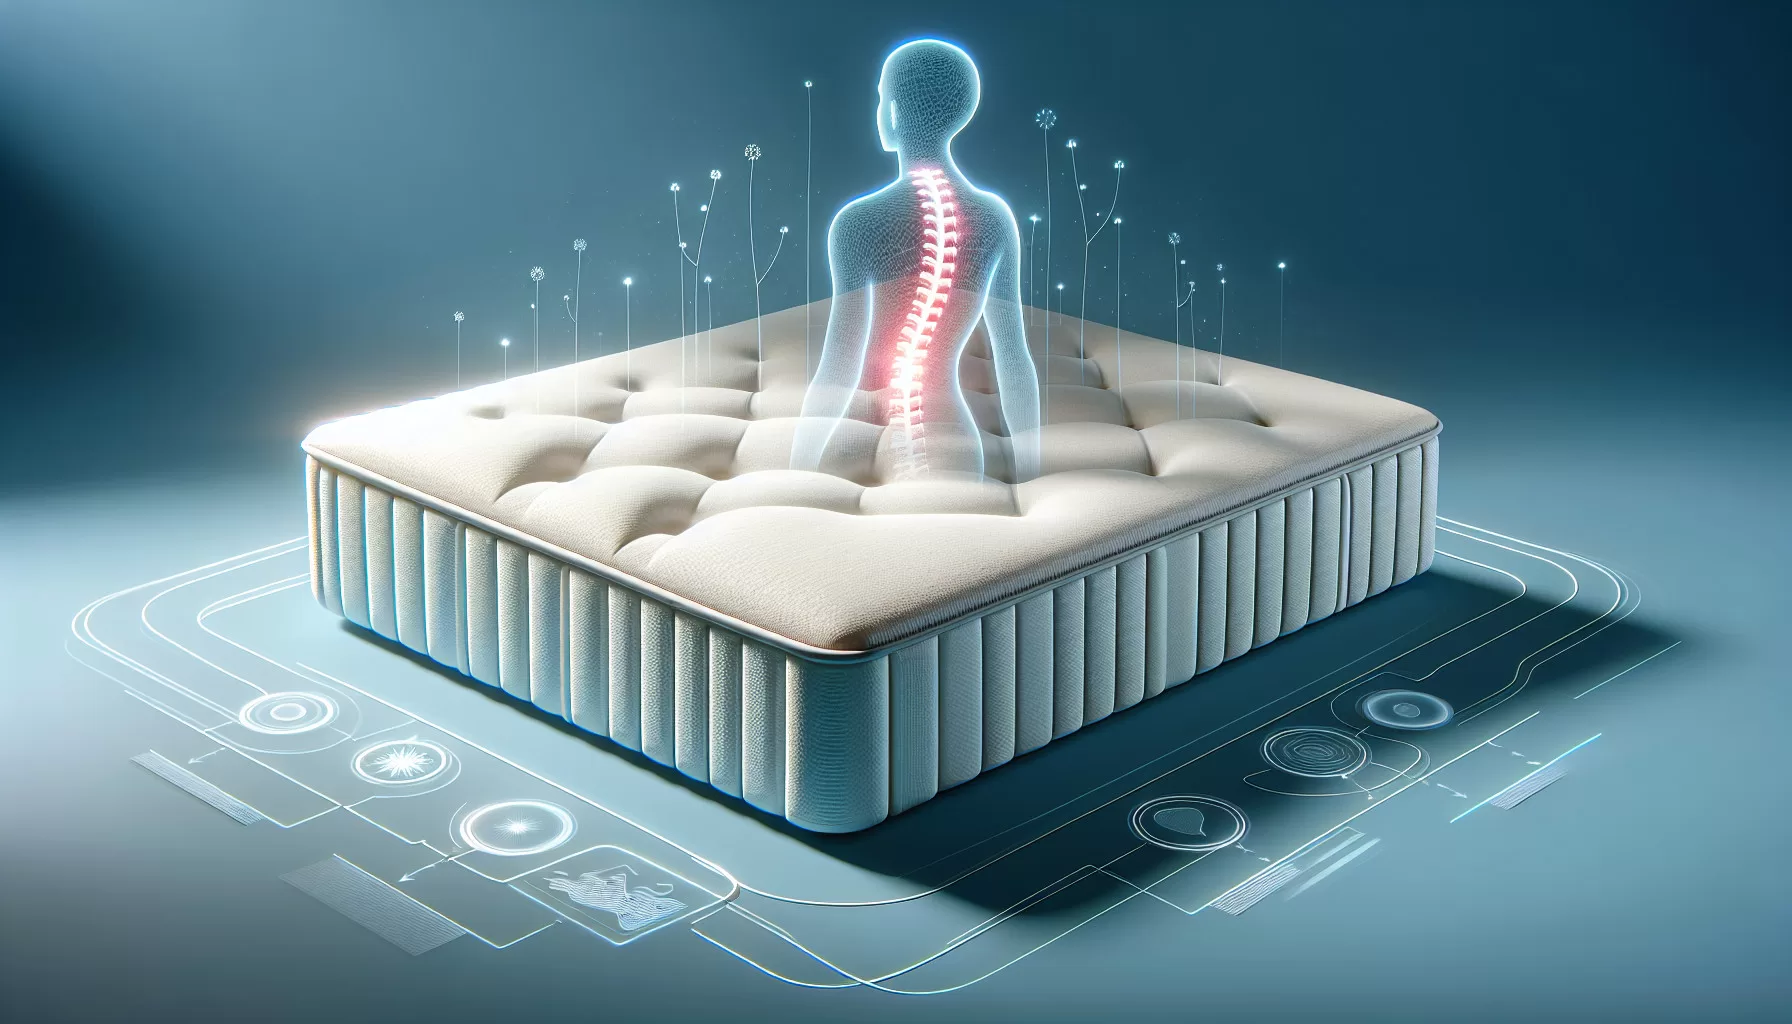 Buying Guide: Finding The Right Memory Foam Mattress For Back Pain Relief